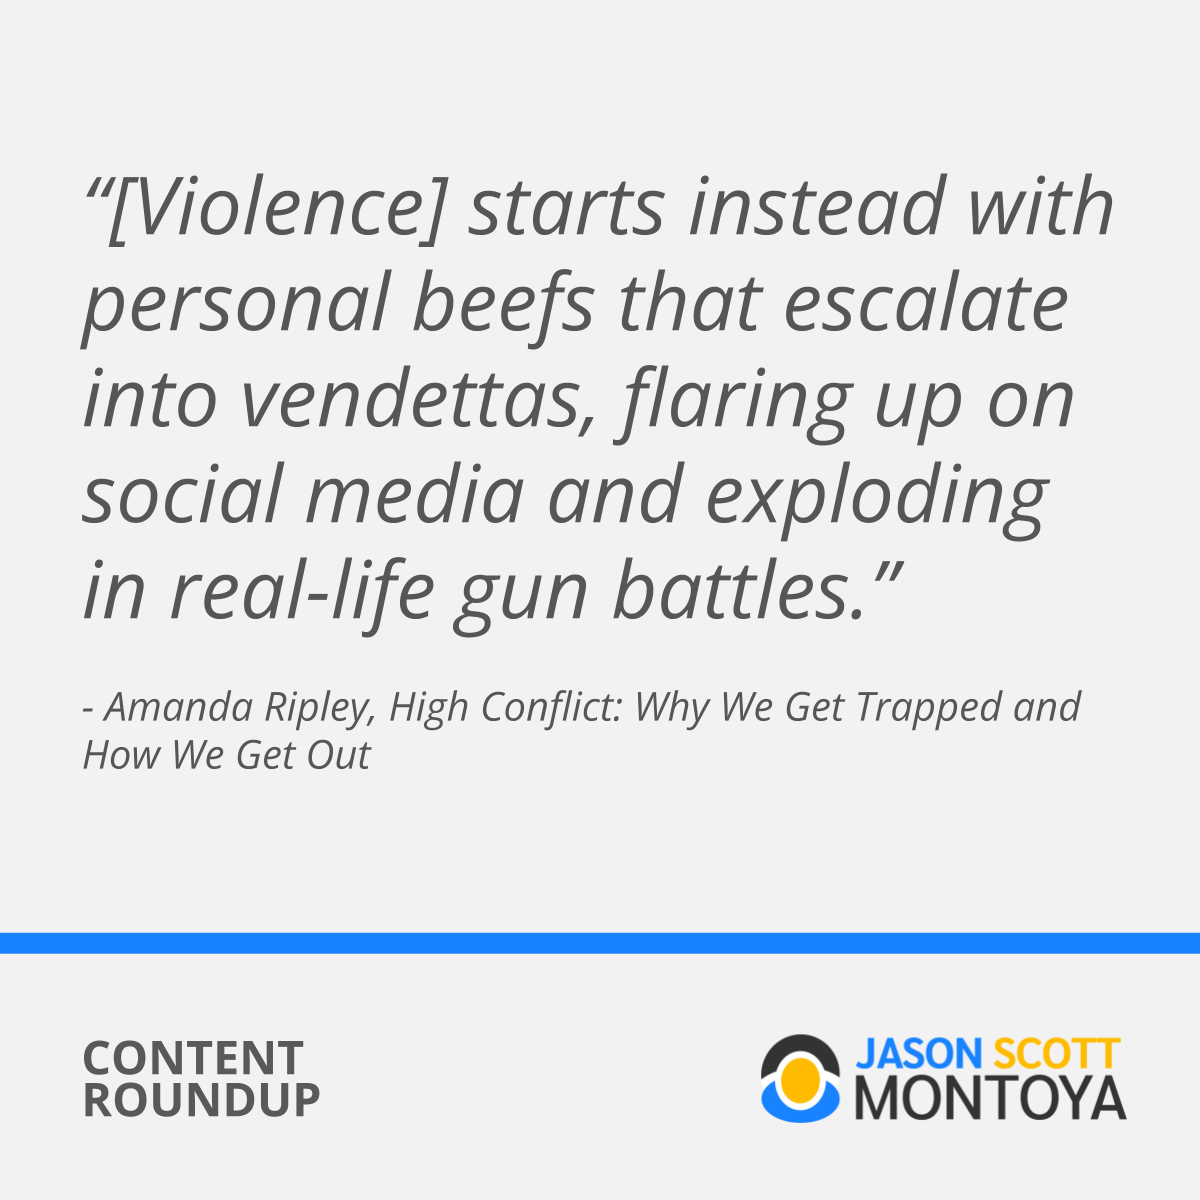 “[Violence] starts instead with personal beefs that escalate into vendettas, faring up on social media and exploding in real-life gun battles.” - Amanda Ripley (book)